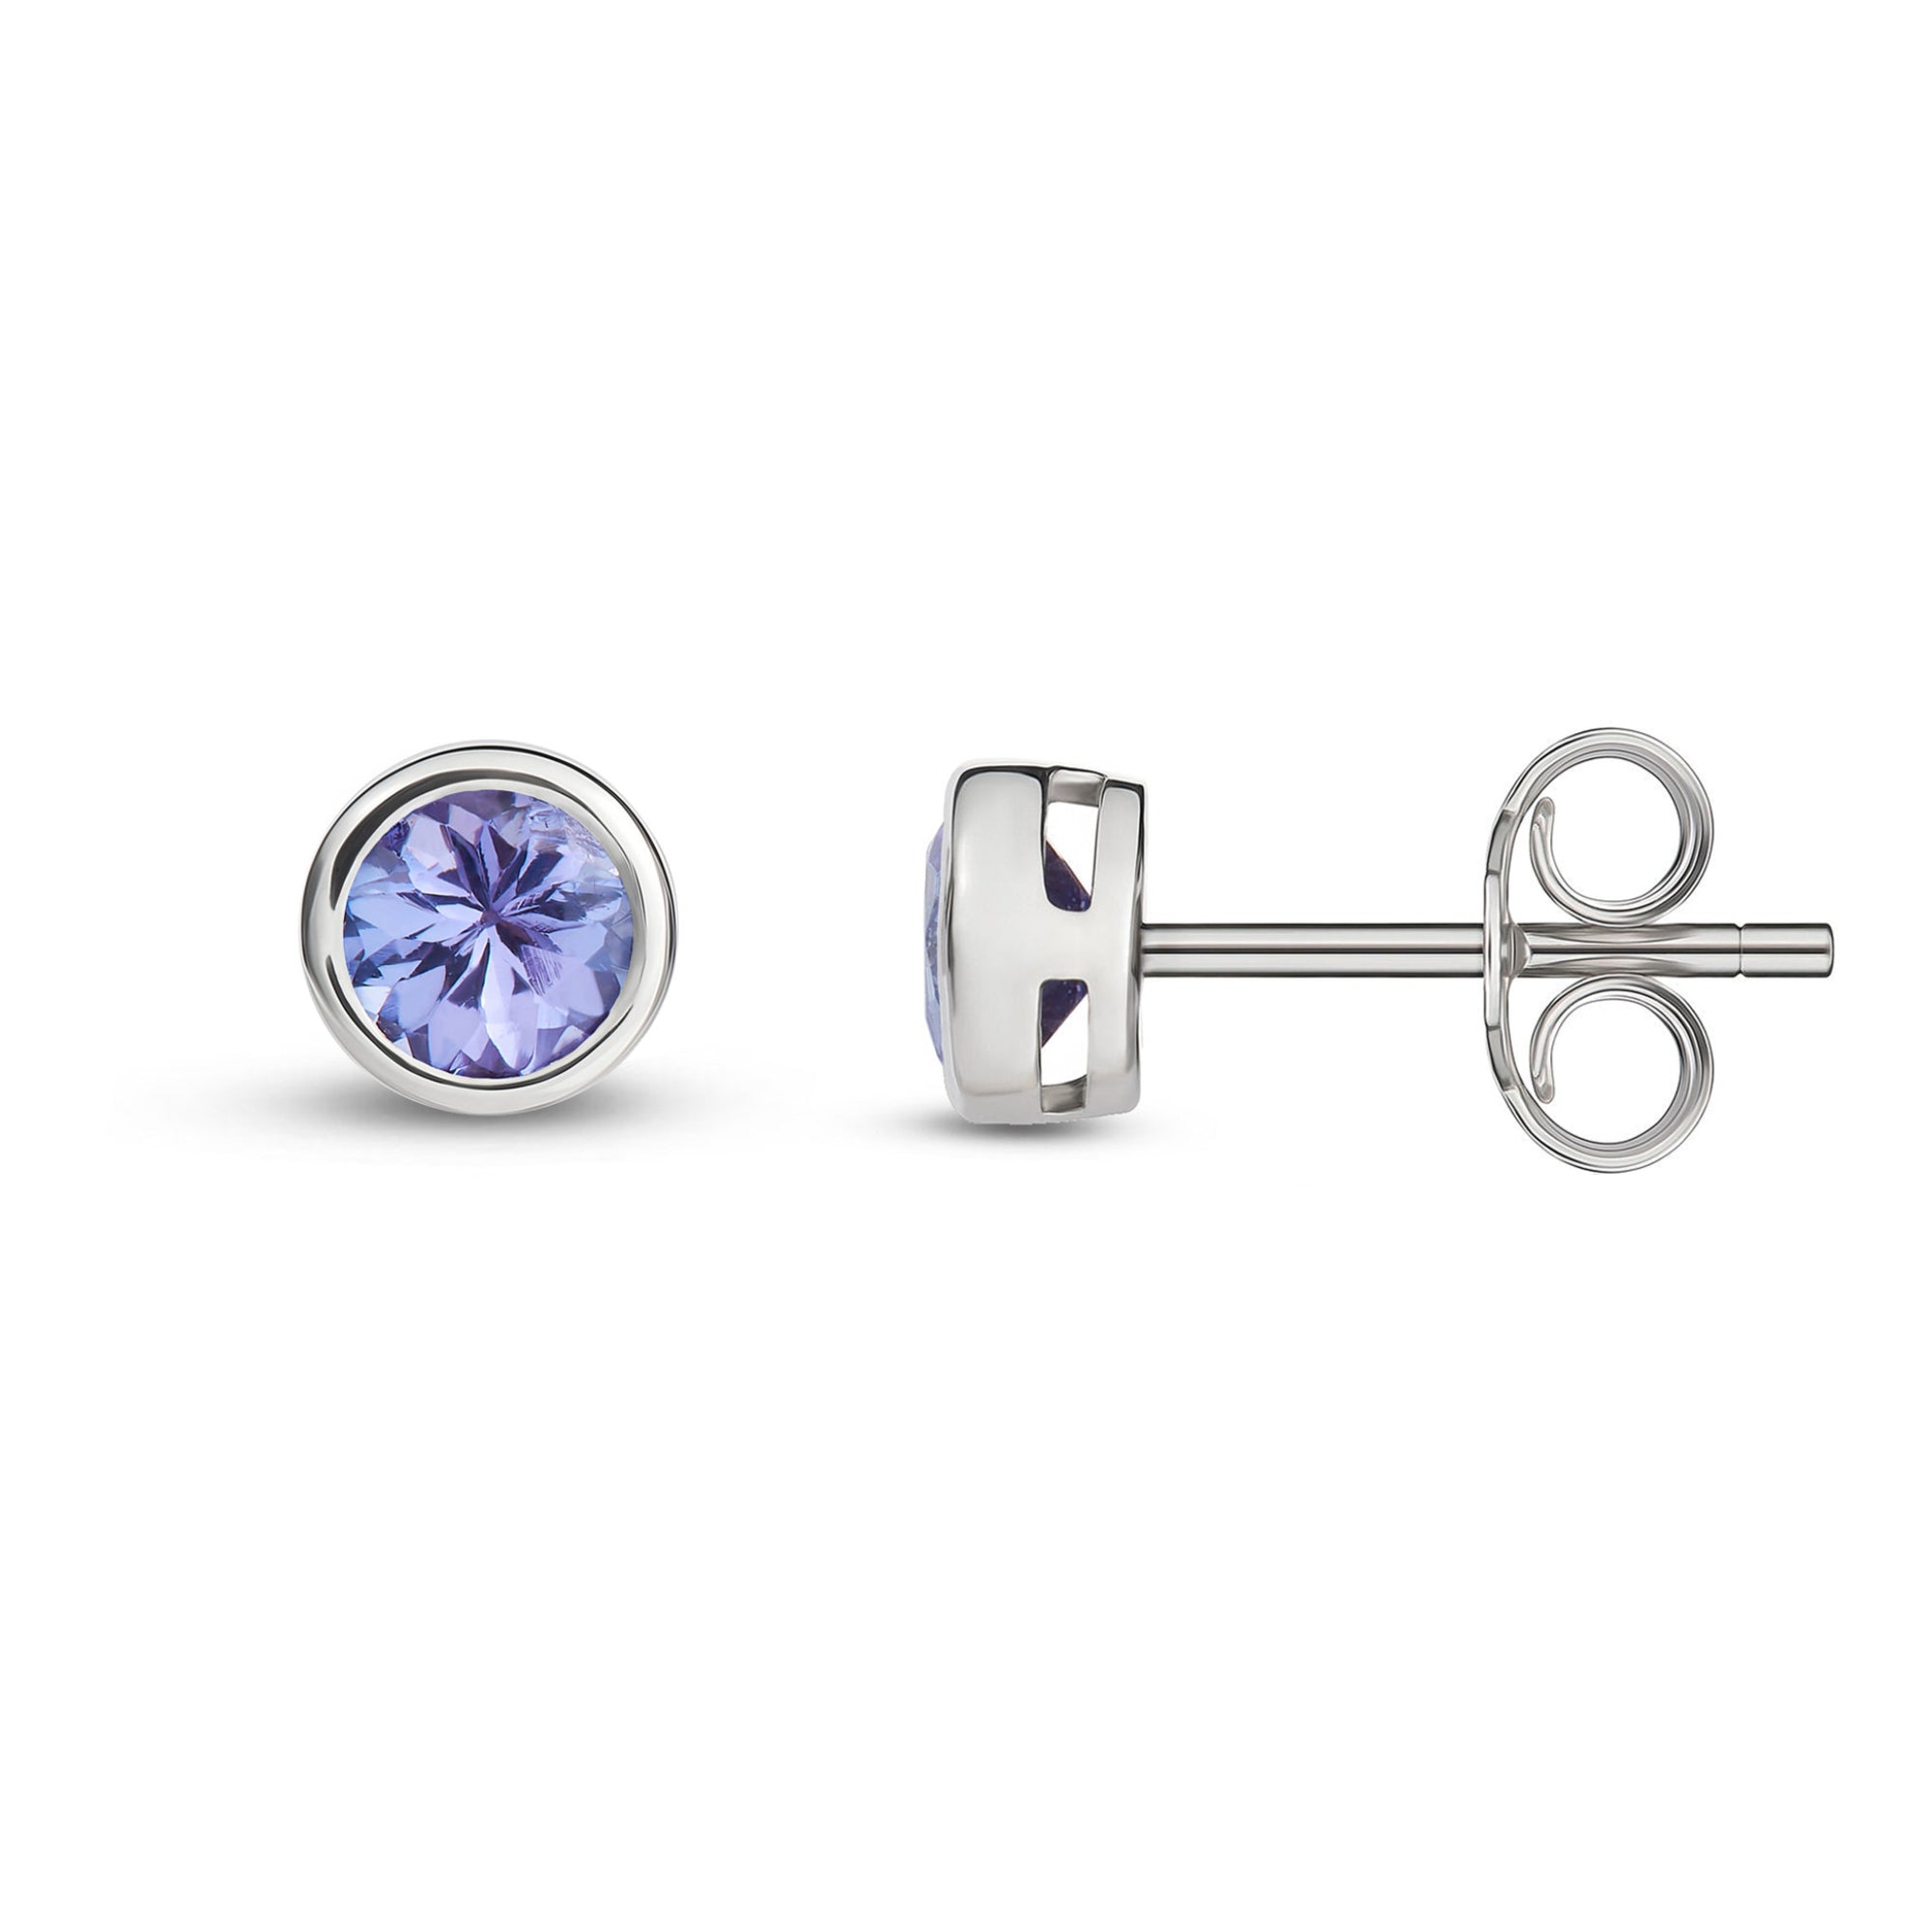 9ct White Gold 4mm Rubover Tanzanite Stud Earrings 0.58ct